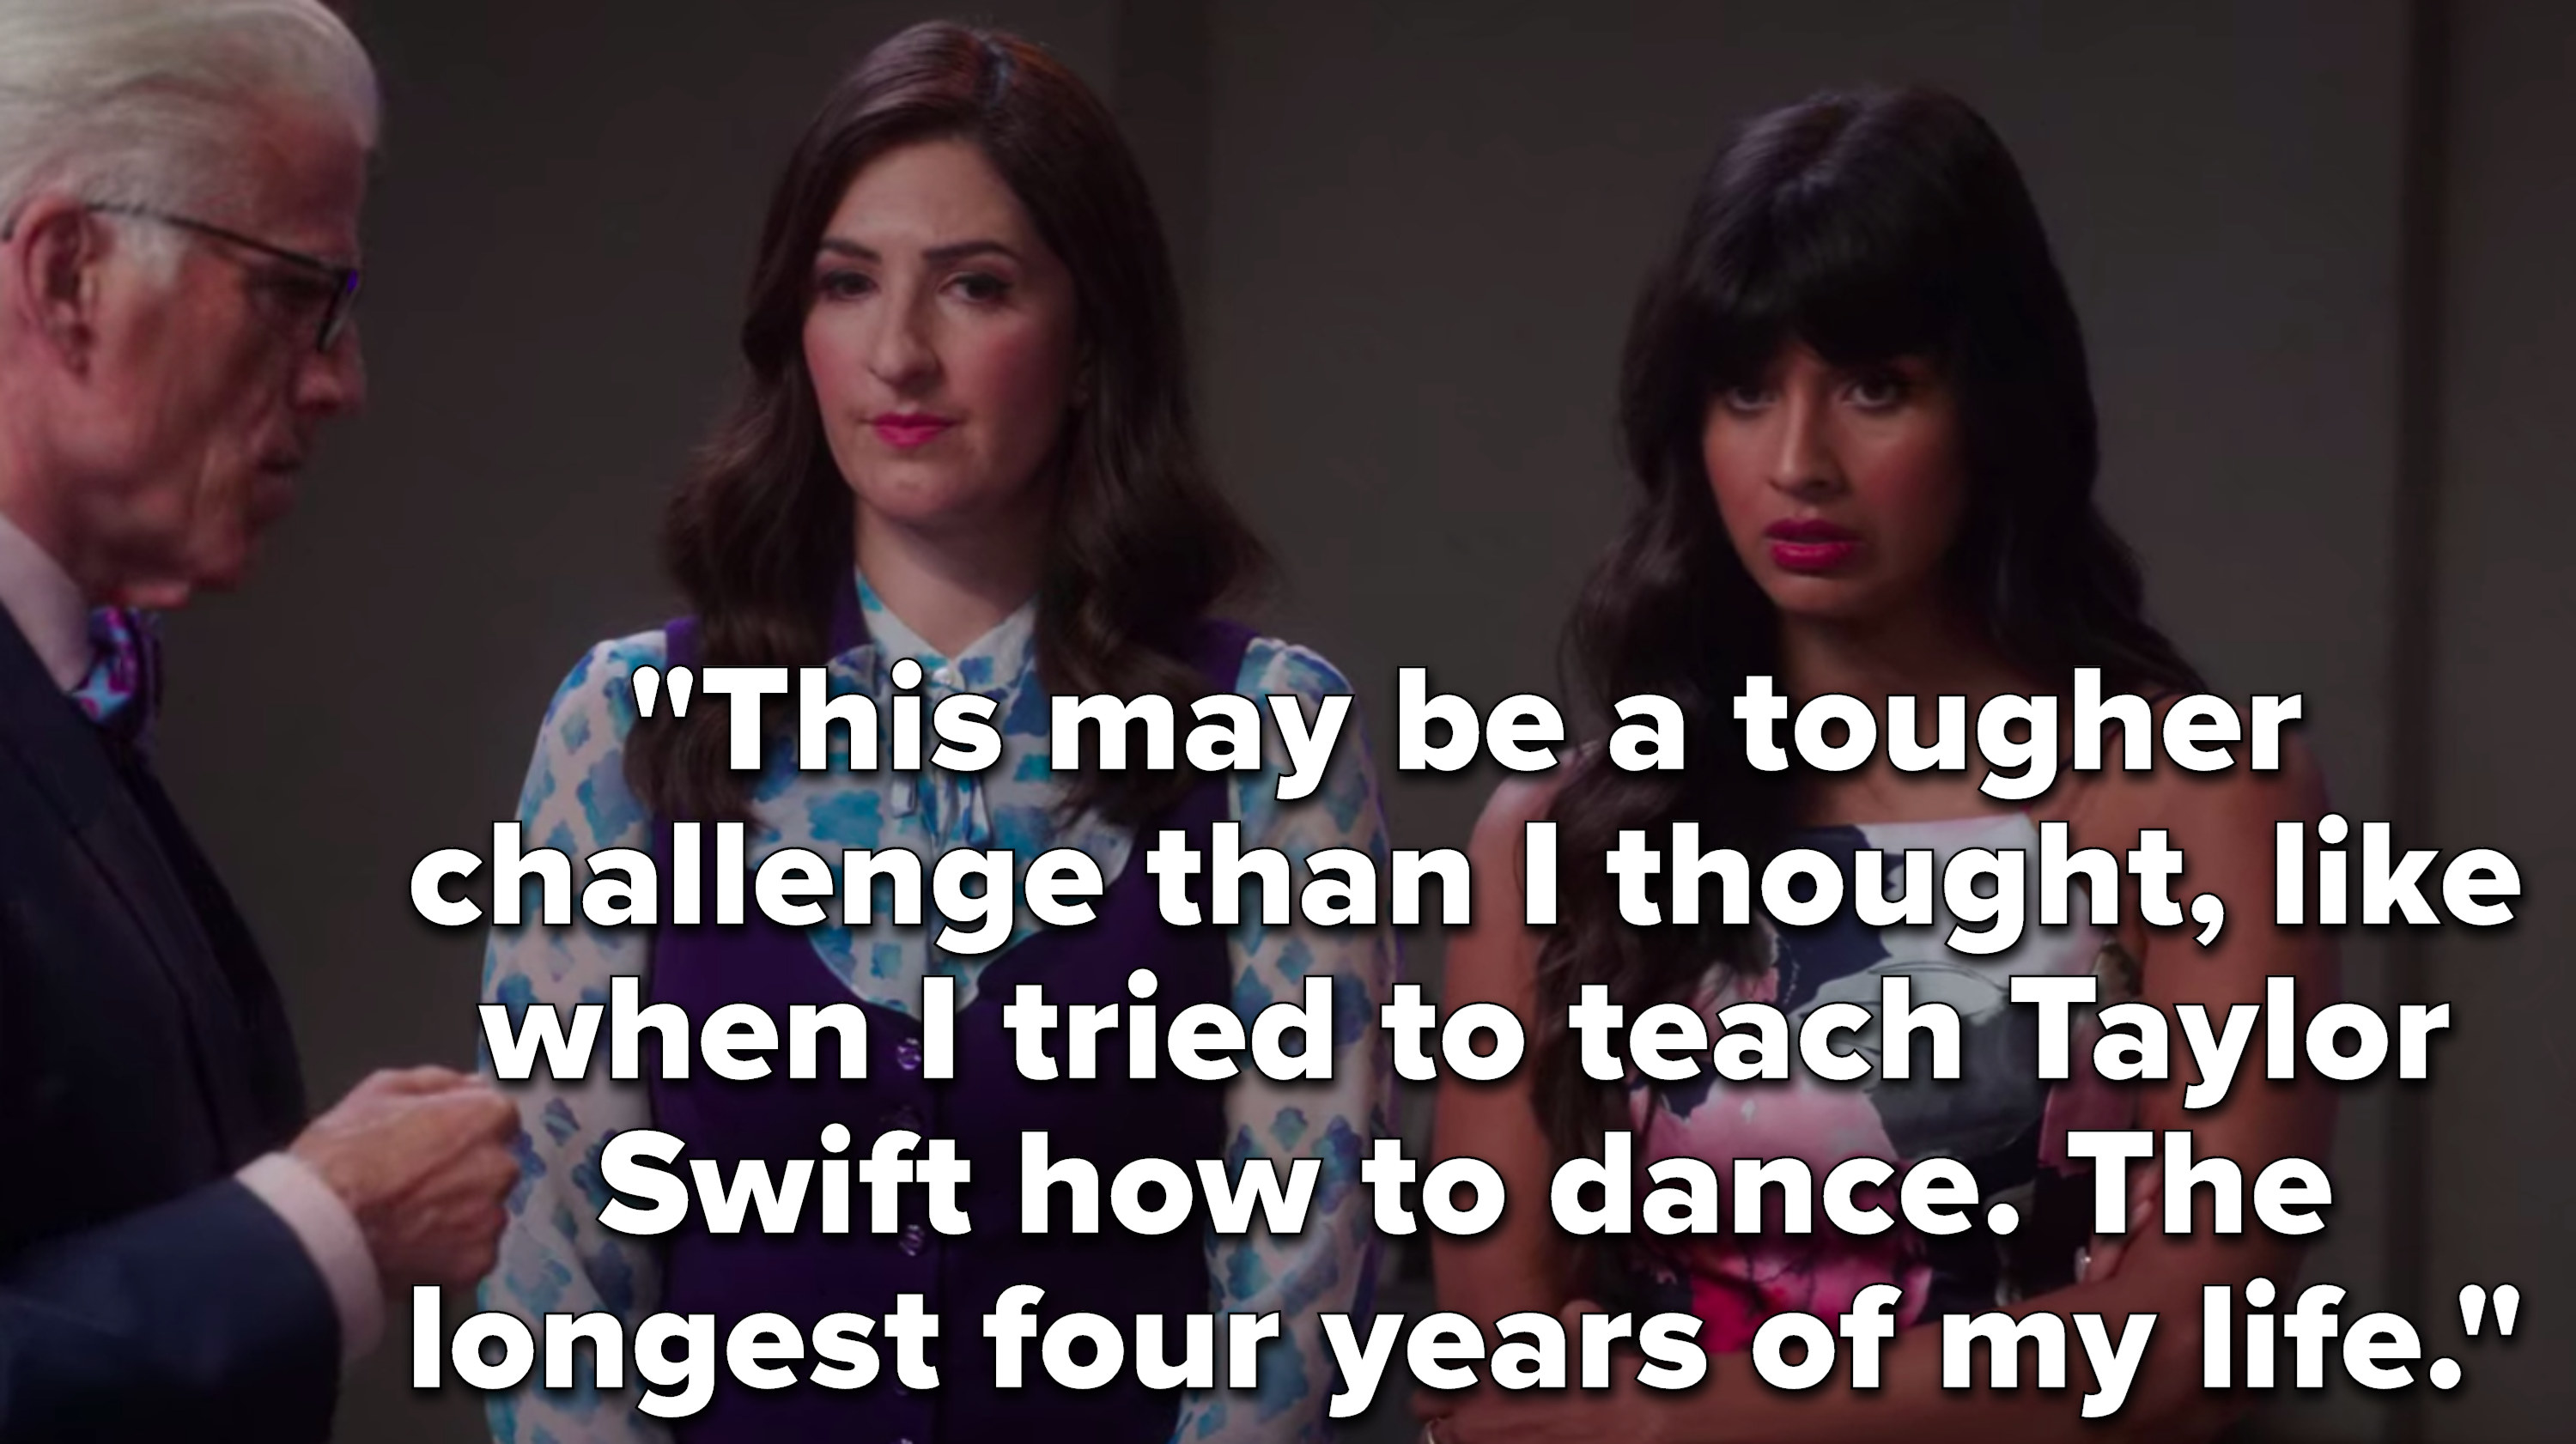 Tahani says, This may be a tougher challenge than I thought, like when I tried to teach Taylor Swift how to dance, the longest four years of my life